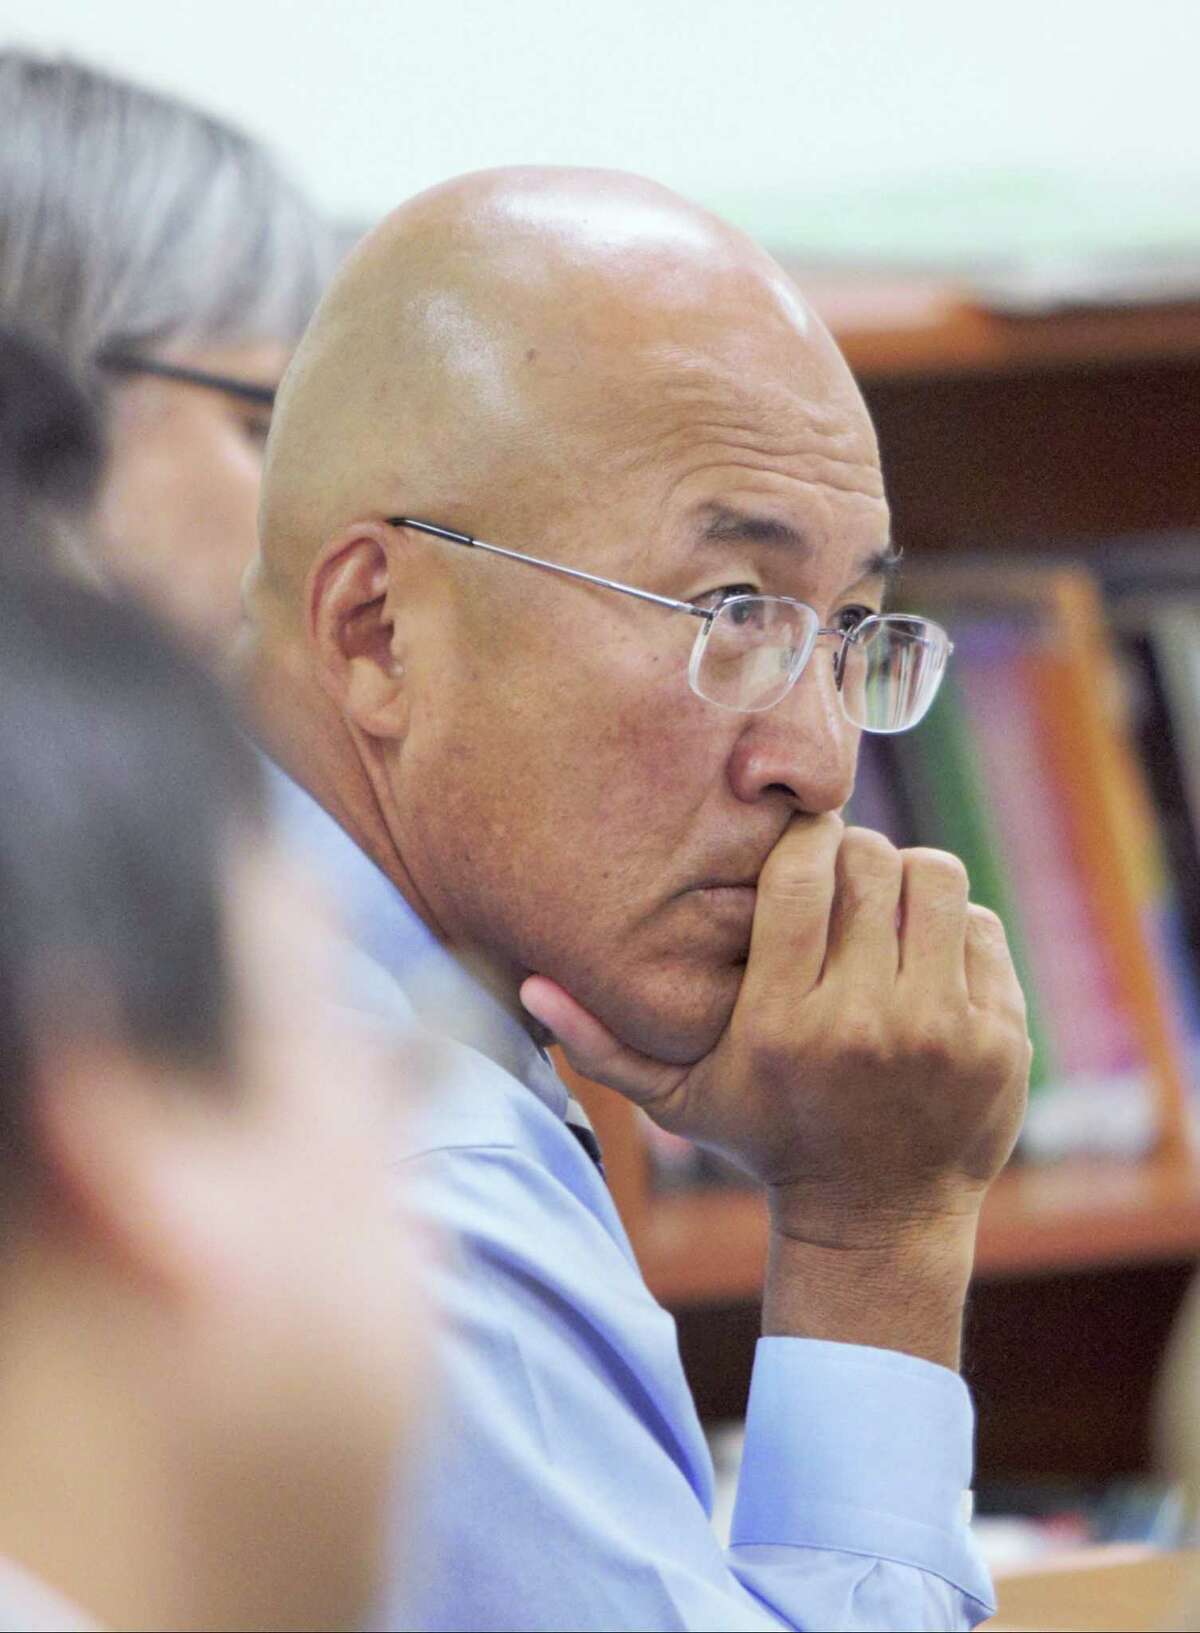 Former Greenwich High School band director John Yoon listens to testimony at a public hearing, regarding his dismissal for abusive behavior, at the Greenwich School's Board of Education in Greenwich, Conn. on August 31, 2015.